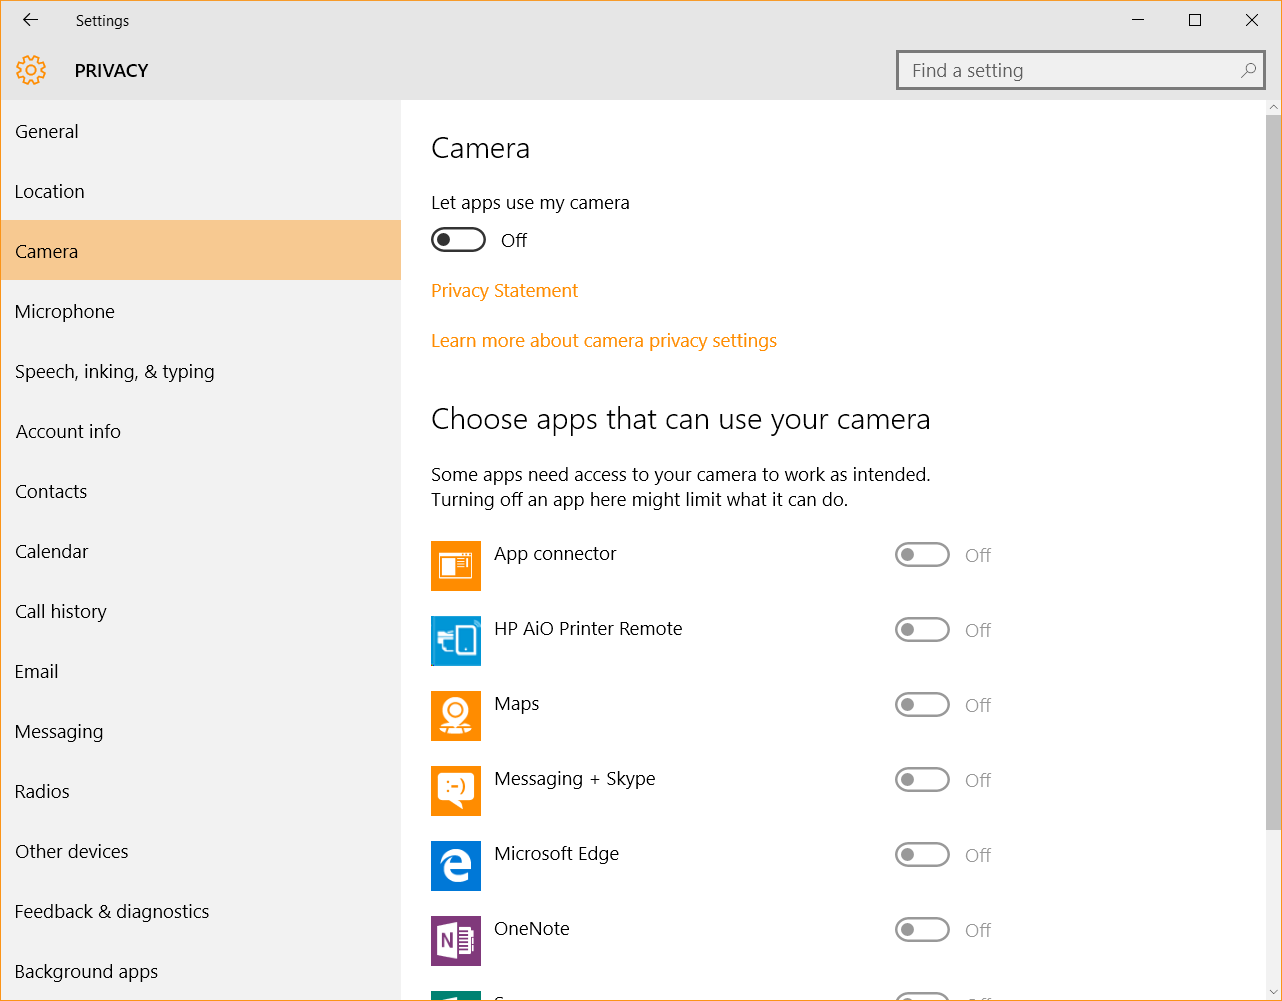 Windows 10 Security Guide - Camera Privacy Settings